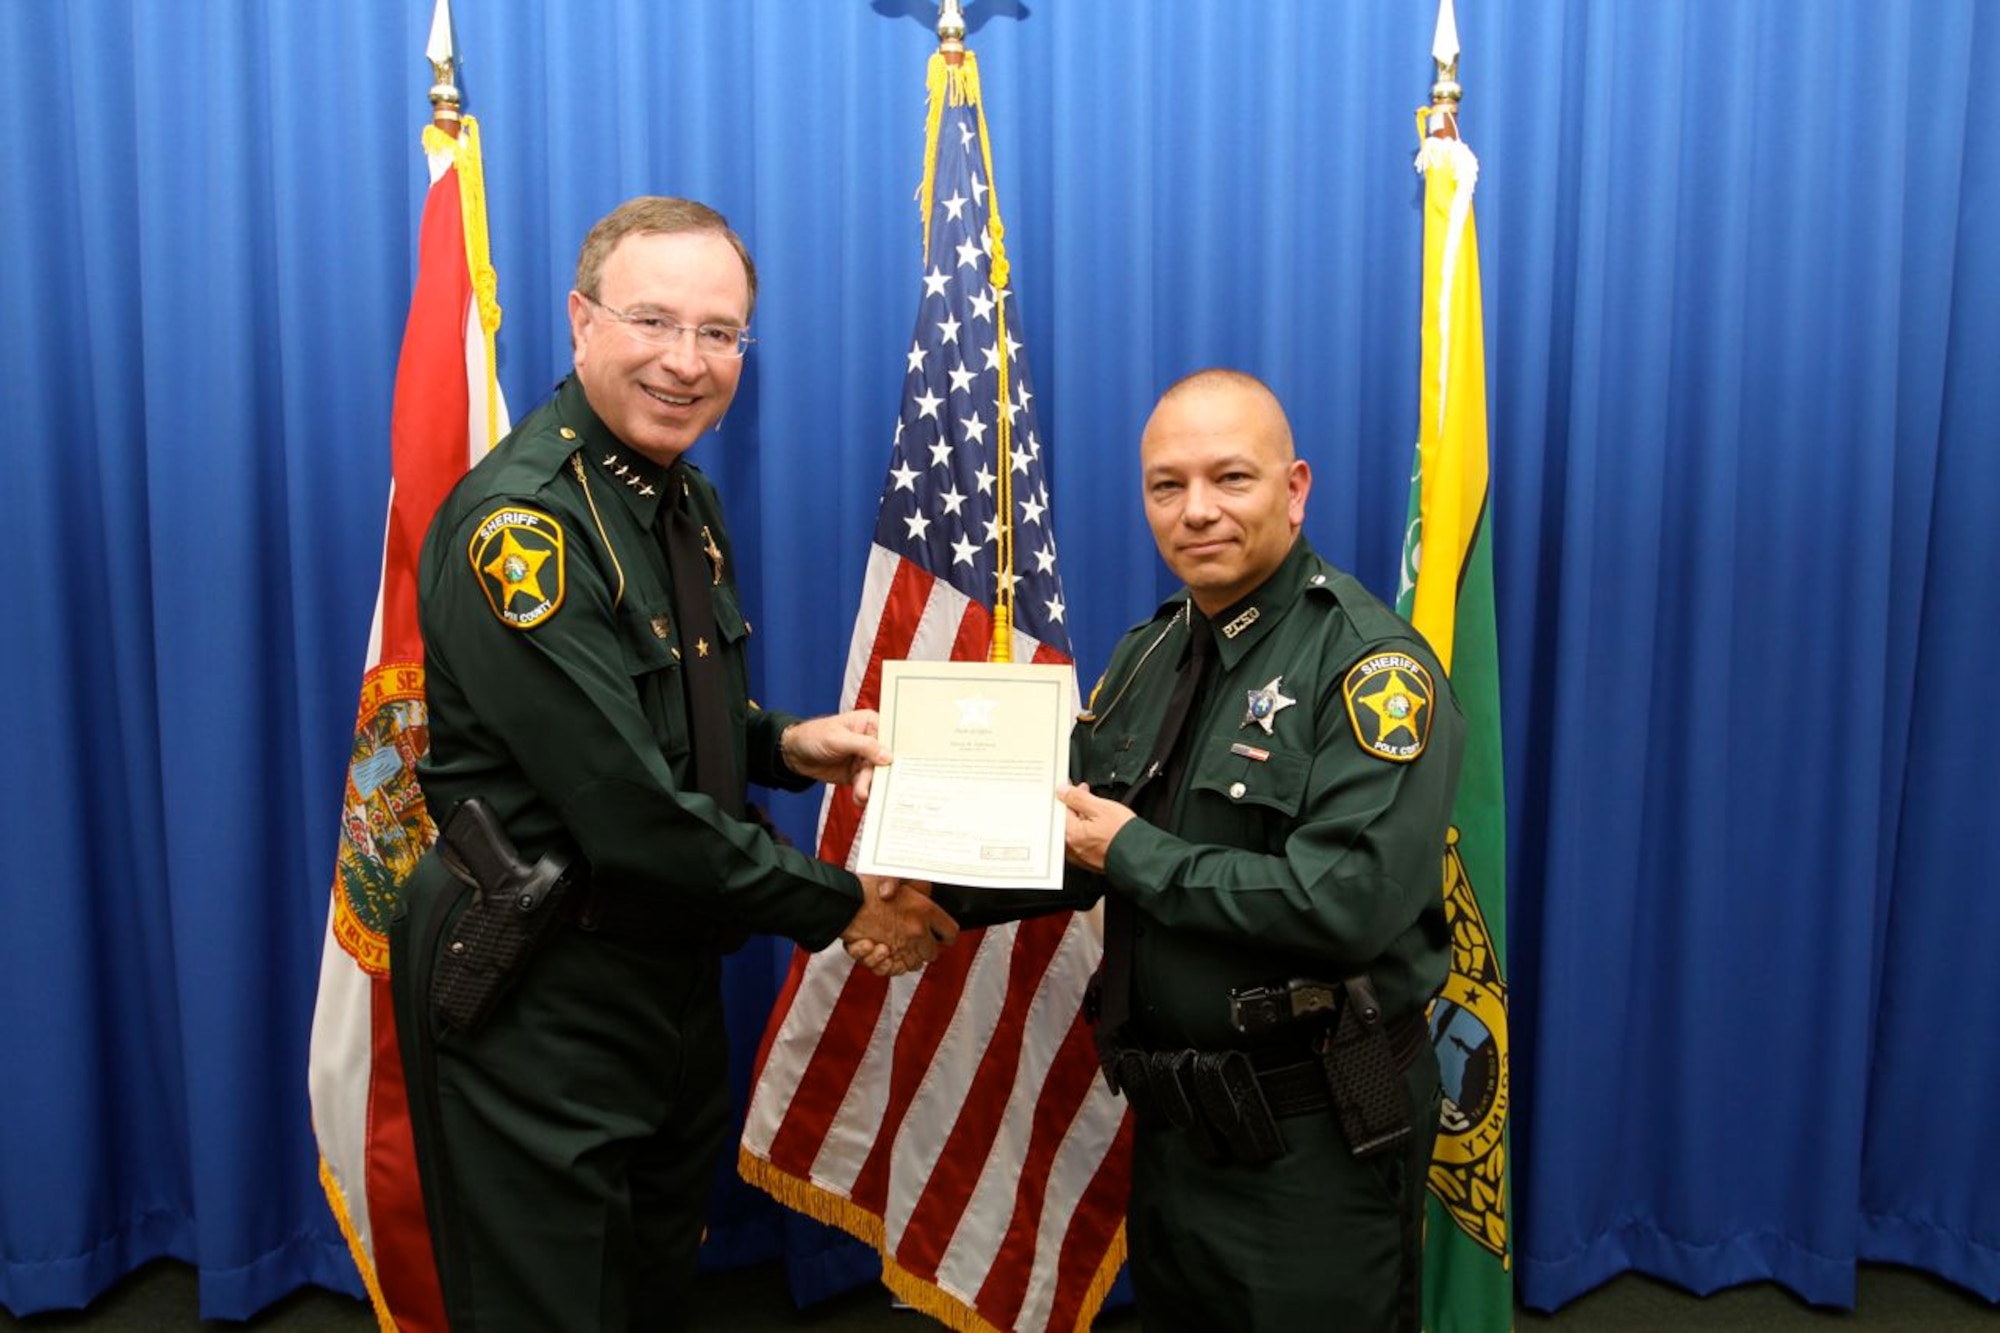 U.S. Air Force Staff Sgt. Steven Jefferson, 23d Wing Det. 1 Avon Park ground safety manager, receives his oath from Sheriff Grady Judd Nov. 1, 2012. Jefferson is on active duty in the U.S. Air Force and works part time as a deputy sheriff for the Polk County Sheriff's Office in Southeast District, Lake Wales, Fla. (U.S. Air Force photo by Airman 1st Class Jarrod Grammel/Released)